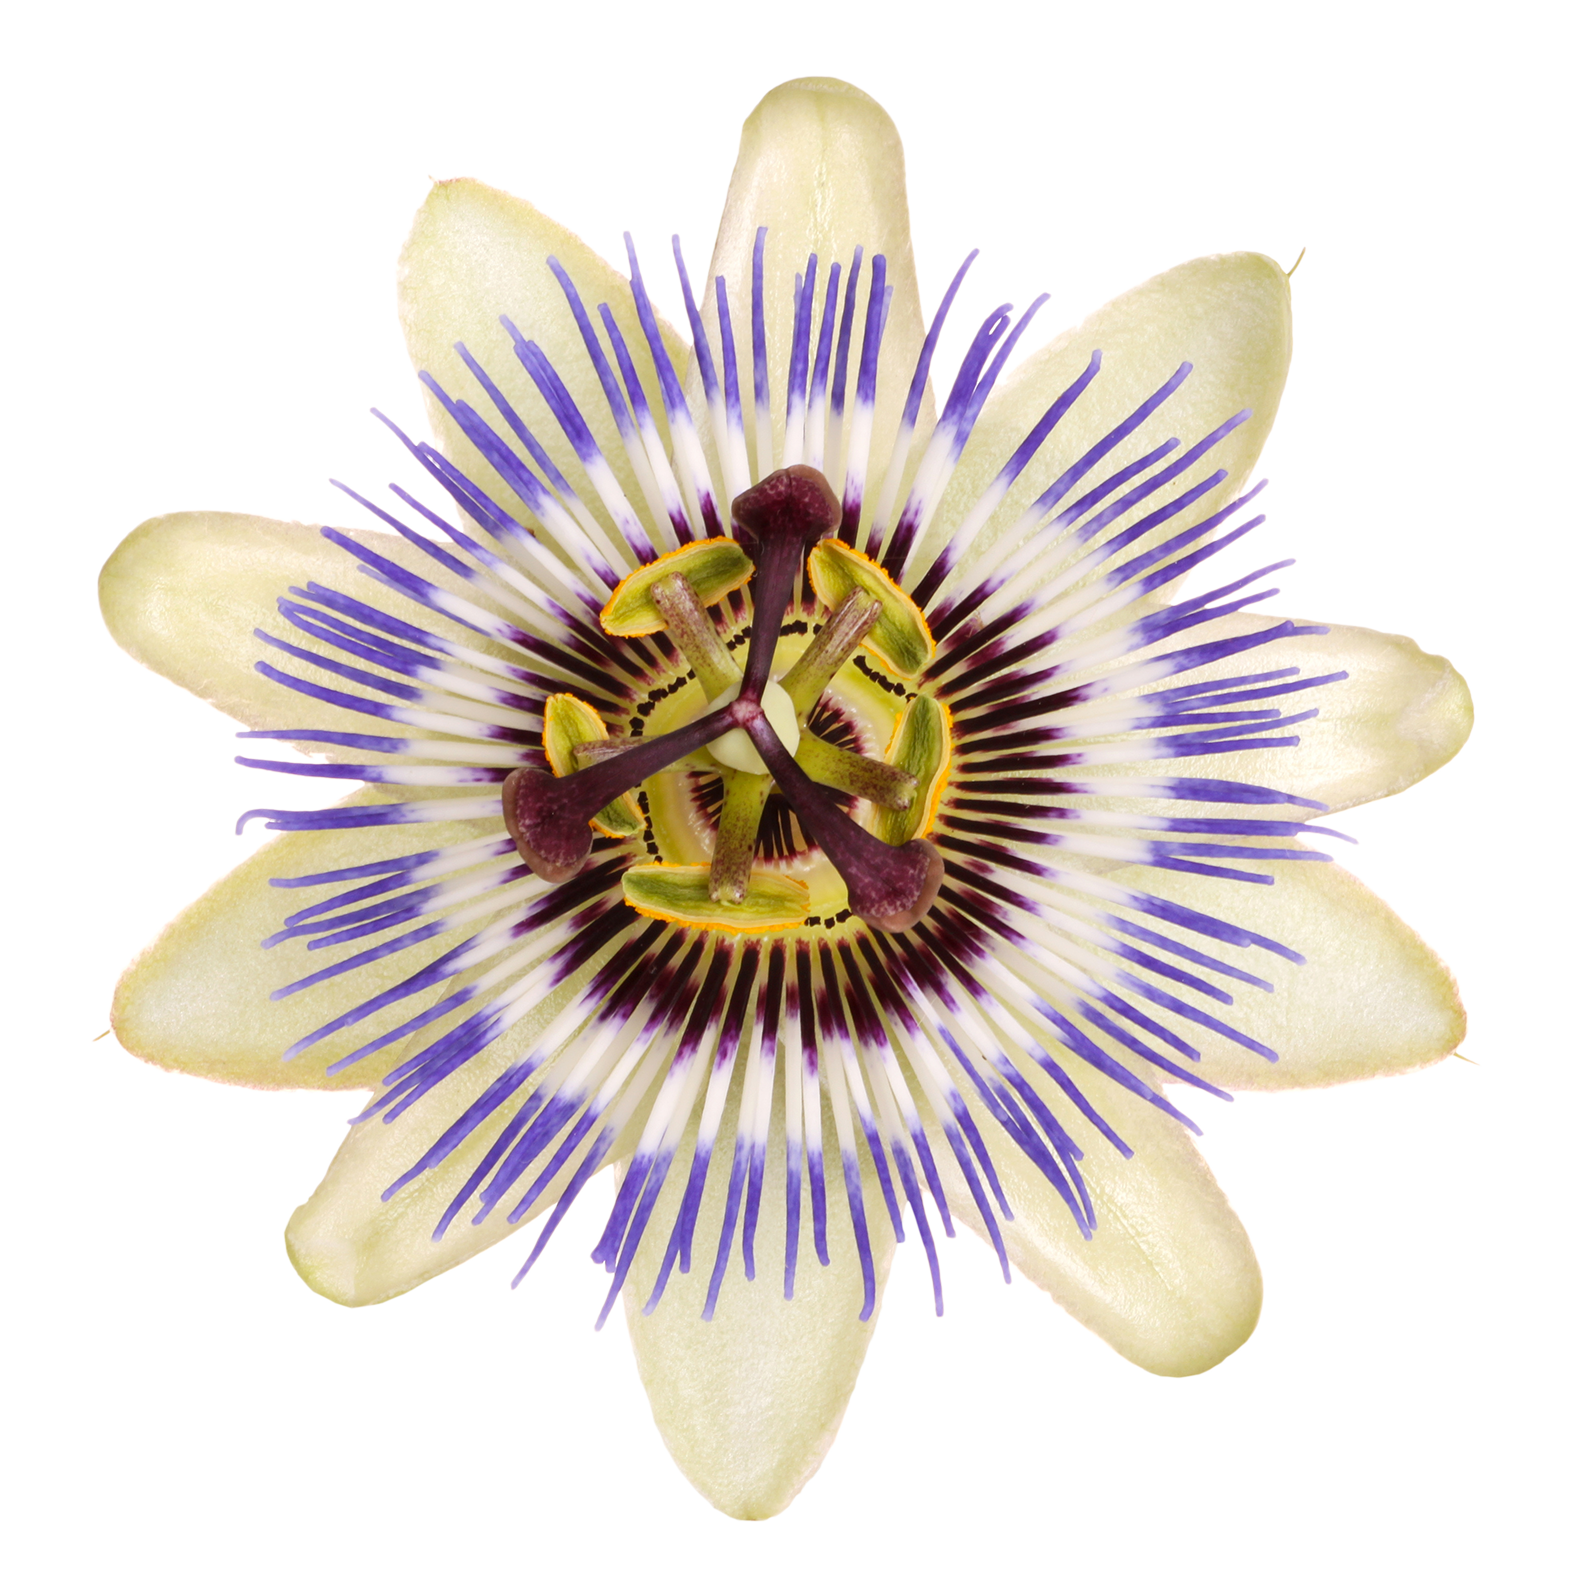 extracted_passionflower_111885362.png__PID:51938f2a-1e82-41c4-9046-c3bbc4e56484